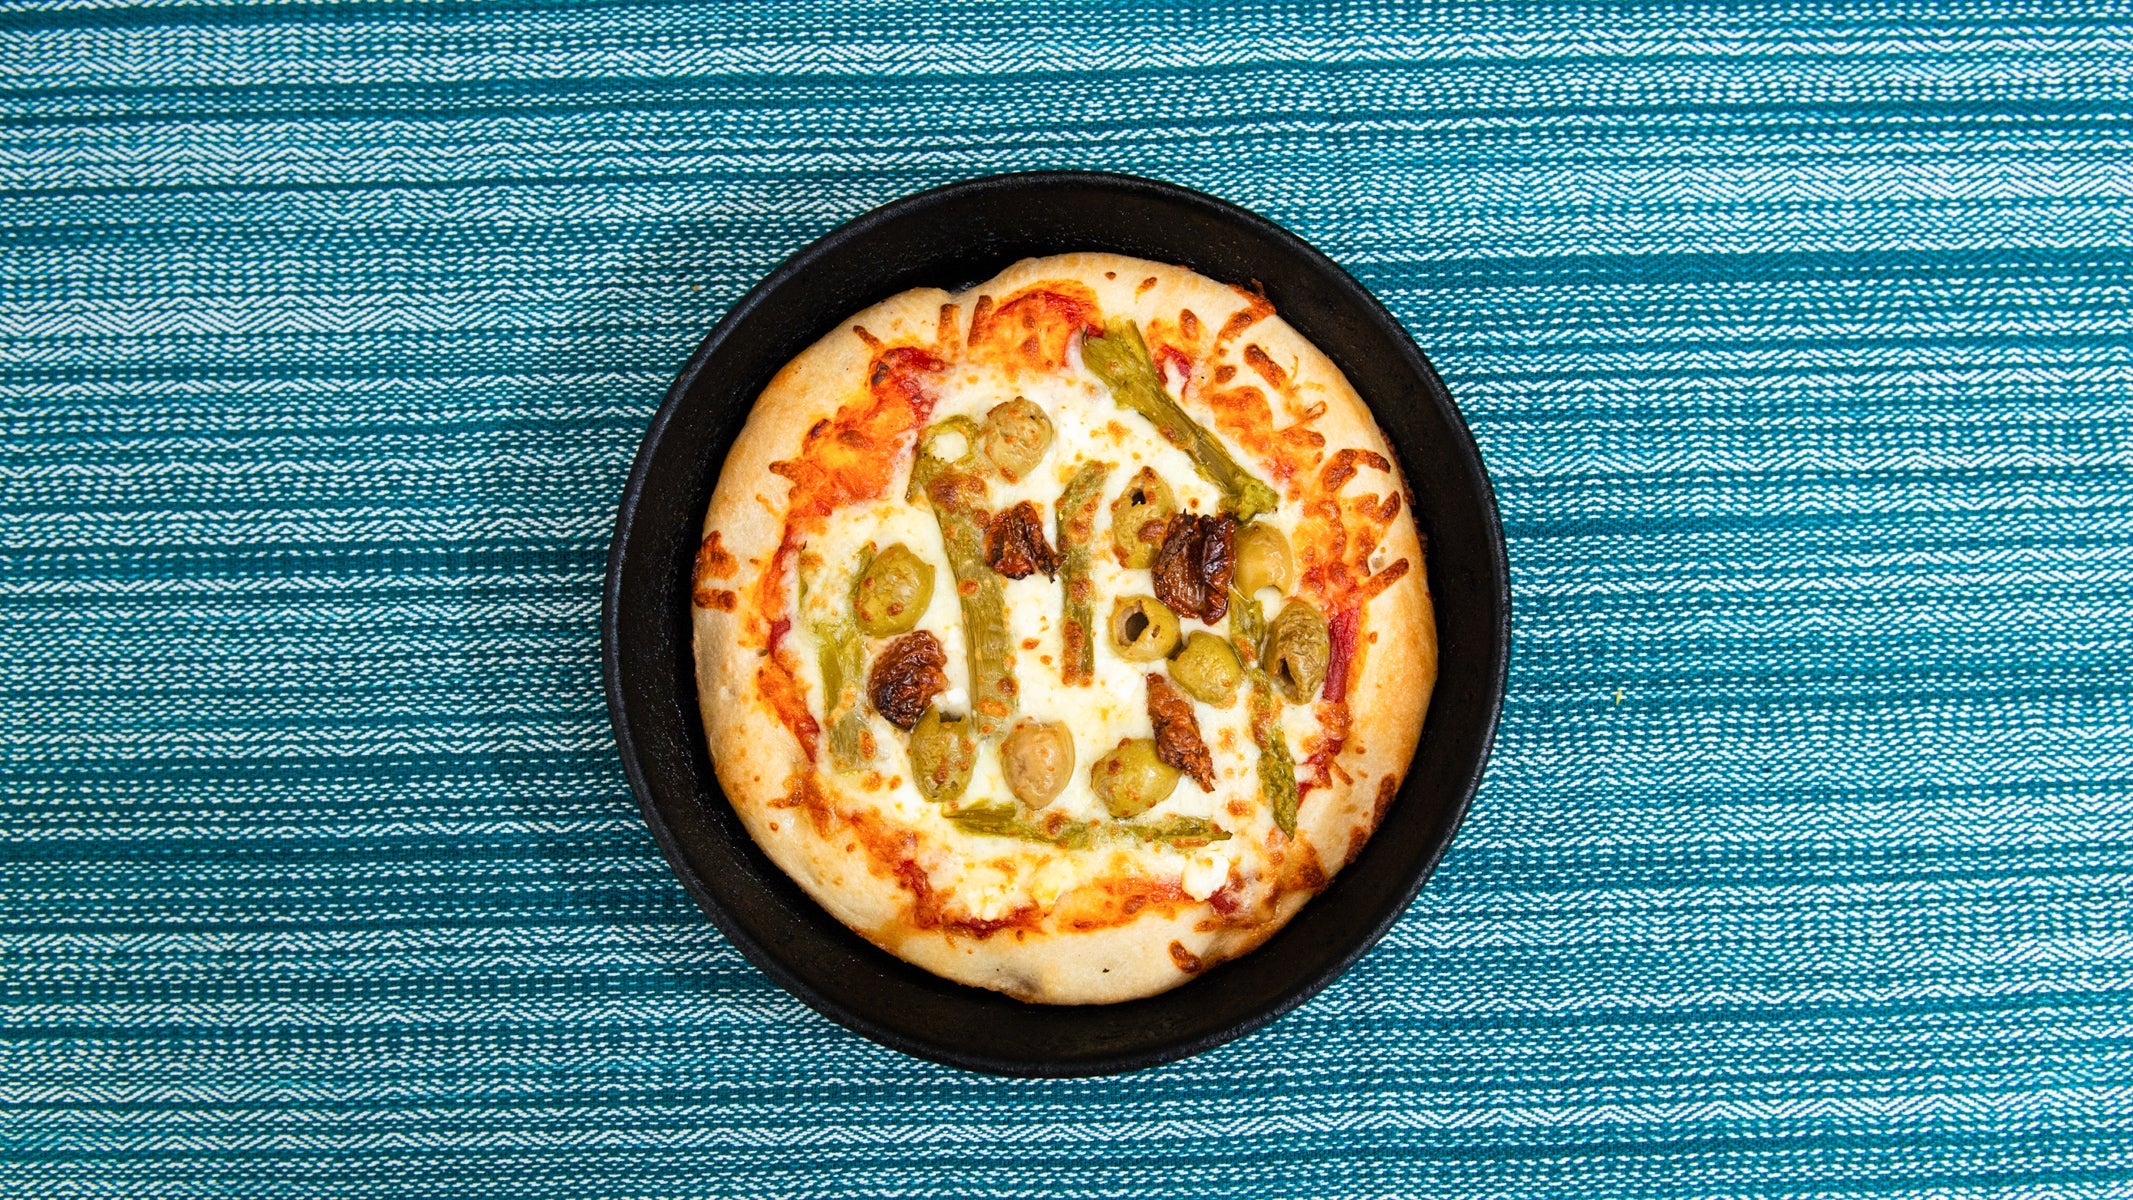 The Olive Pizza